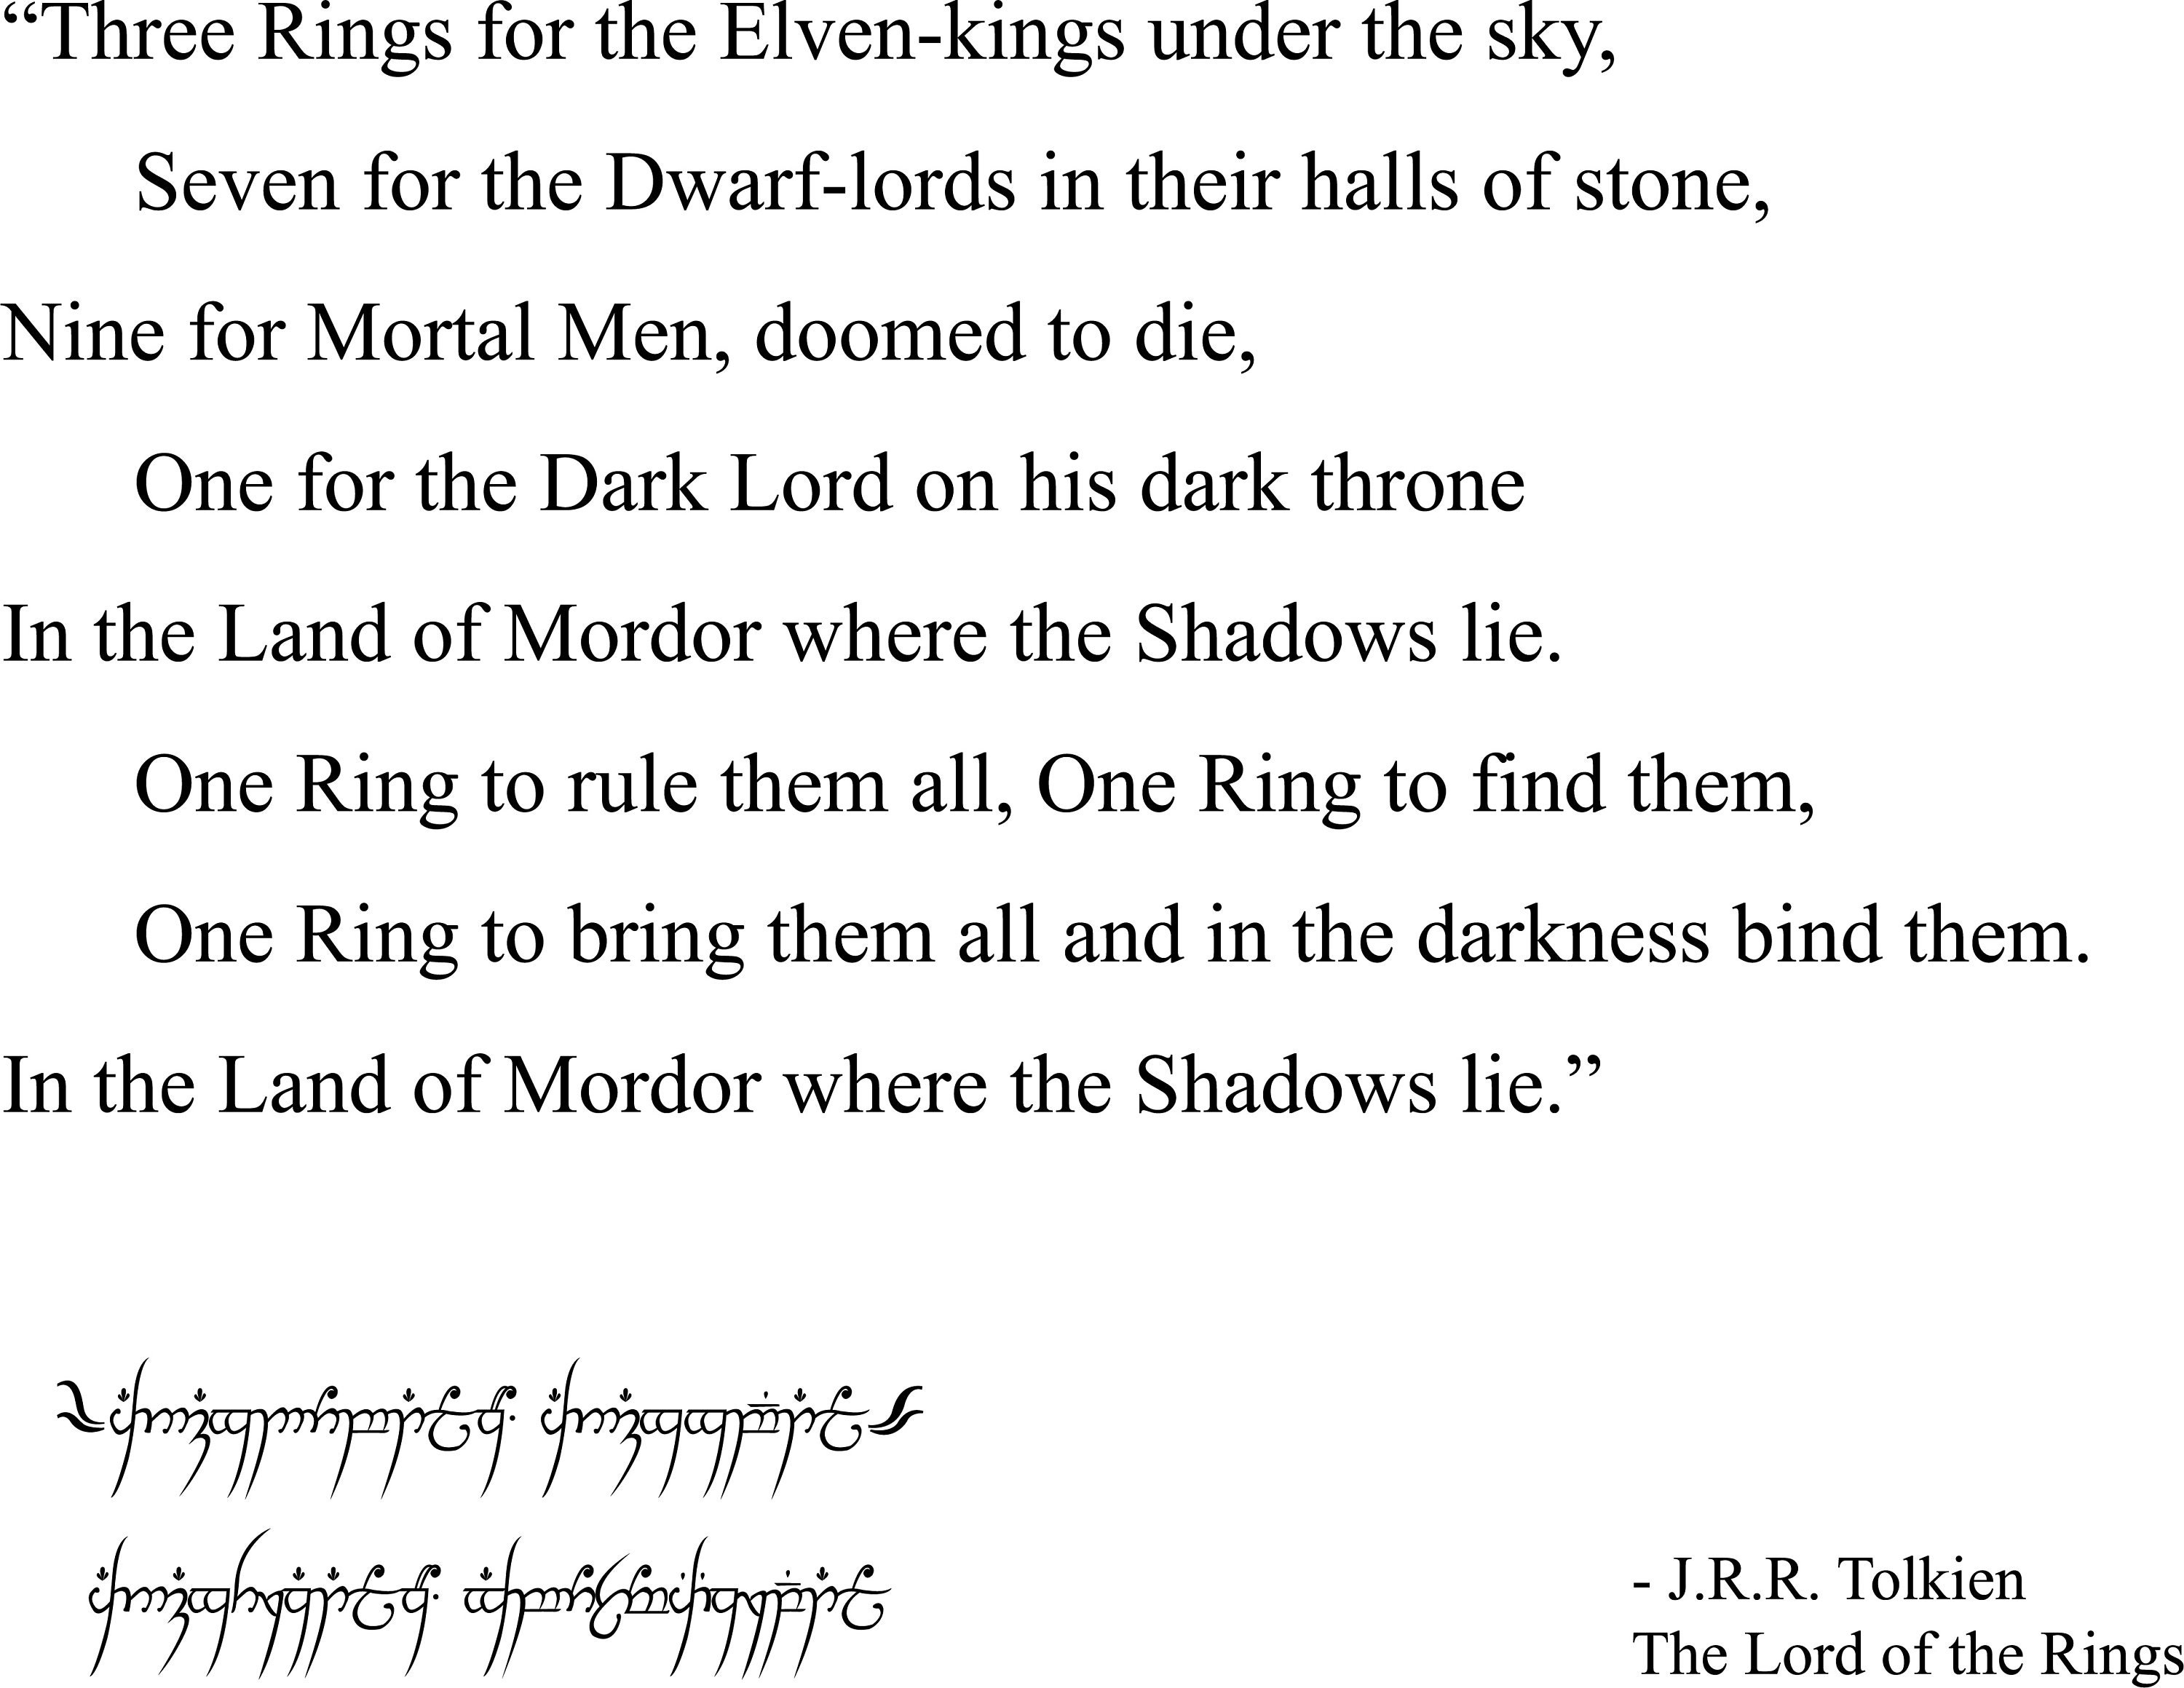 One Ring to rule them all, One Ring to find them, One Ring to bring them  all, and in the darkness bind them